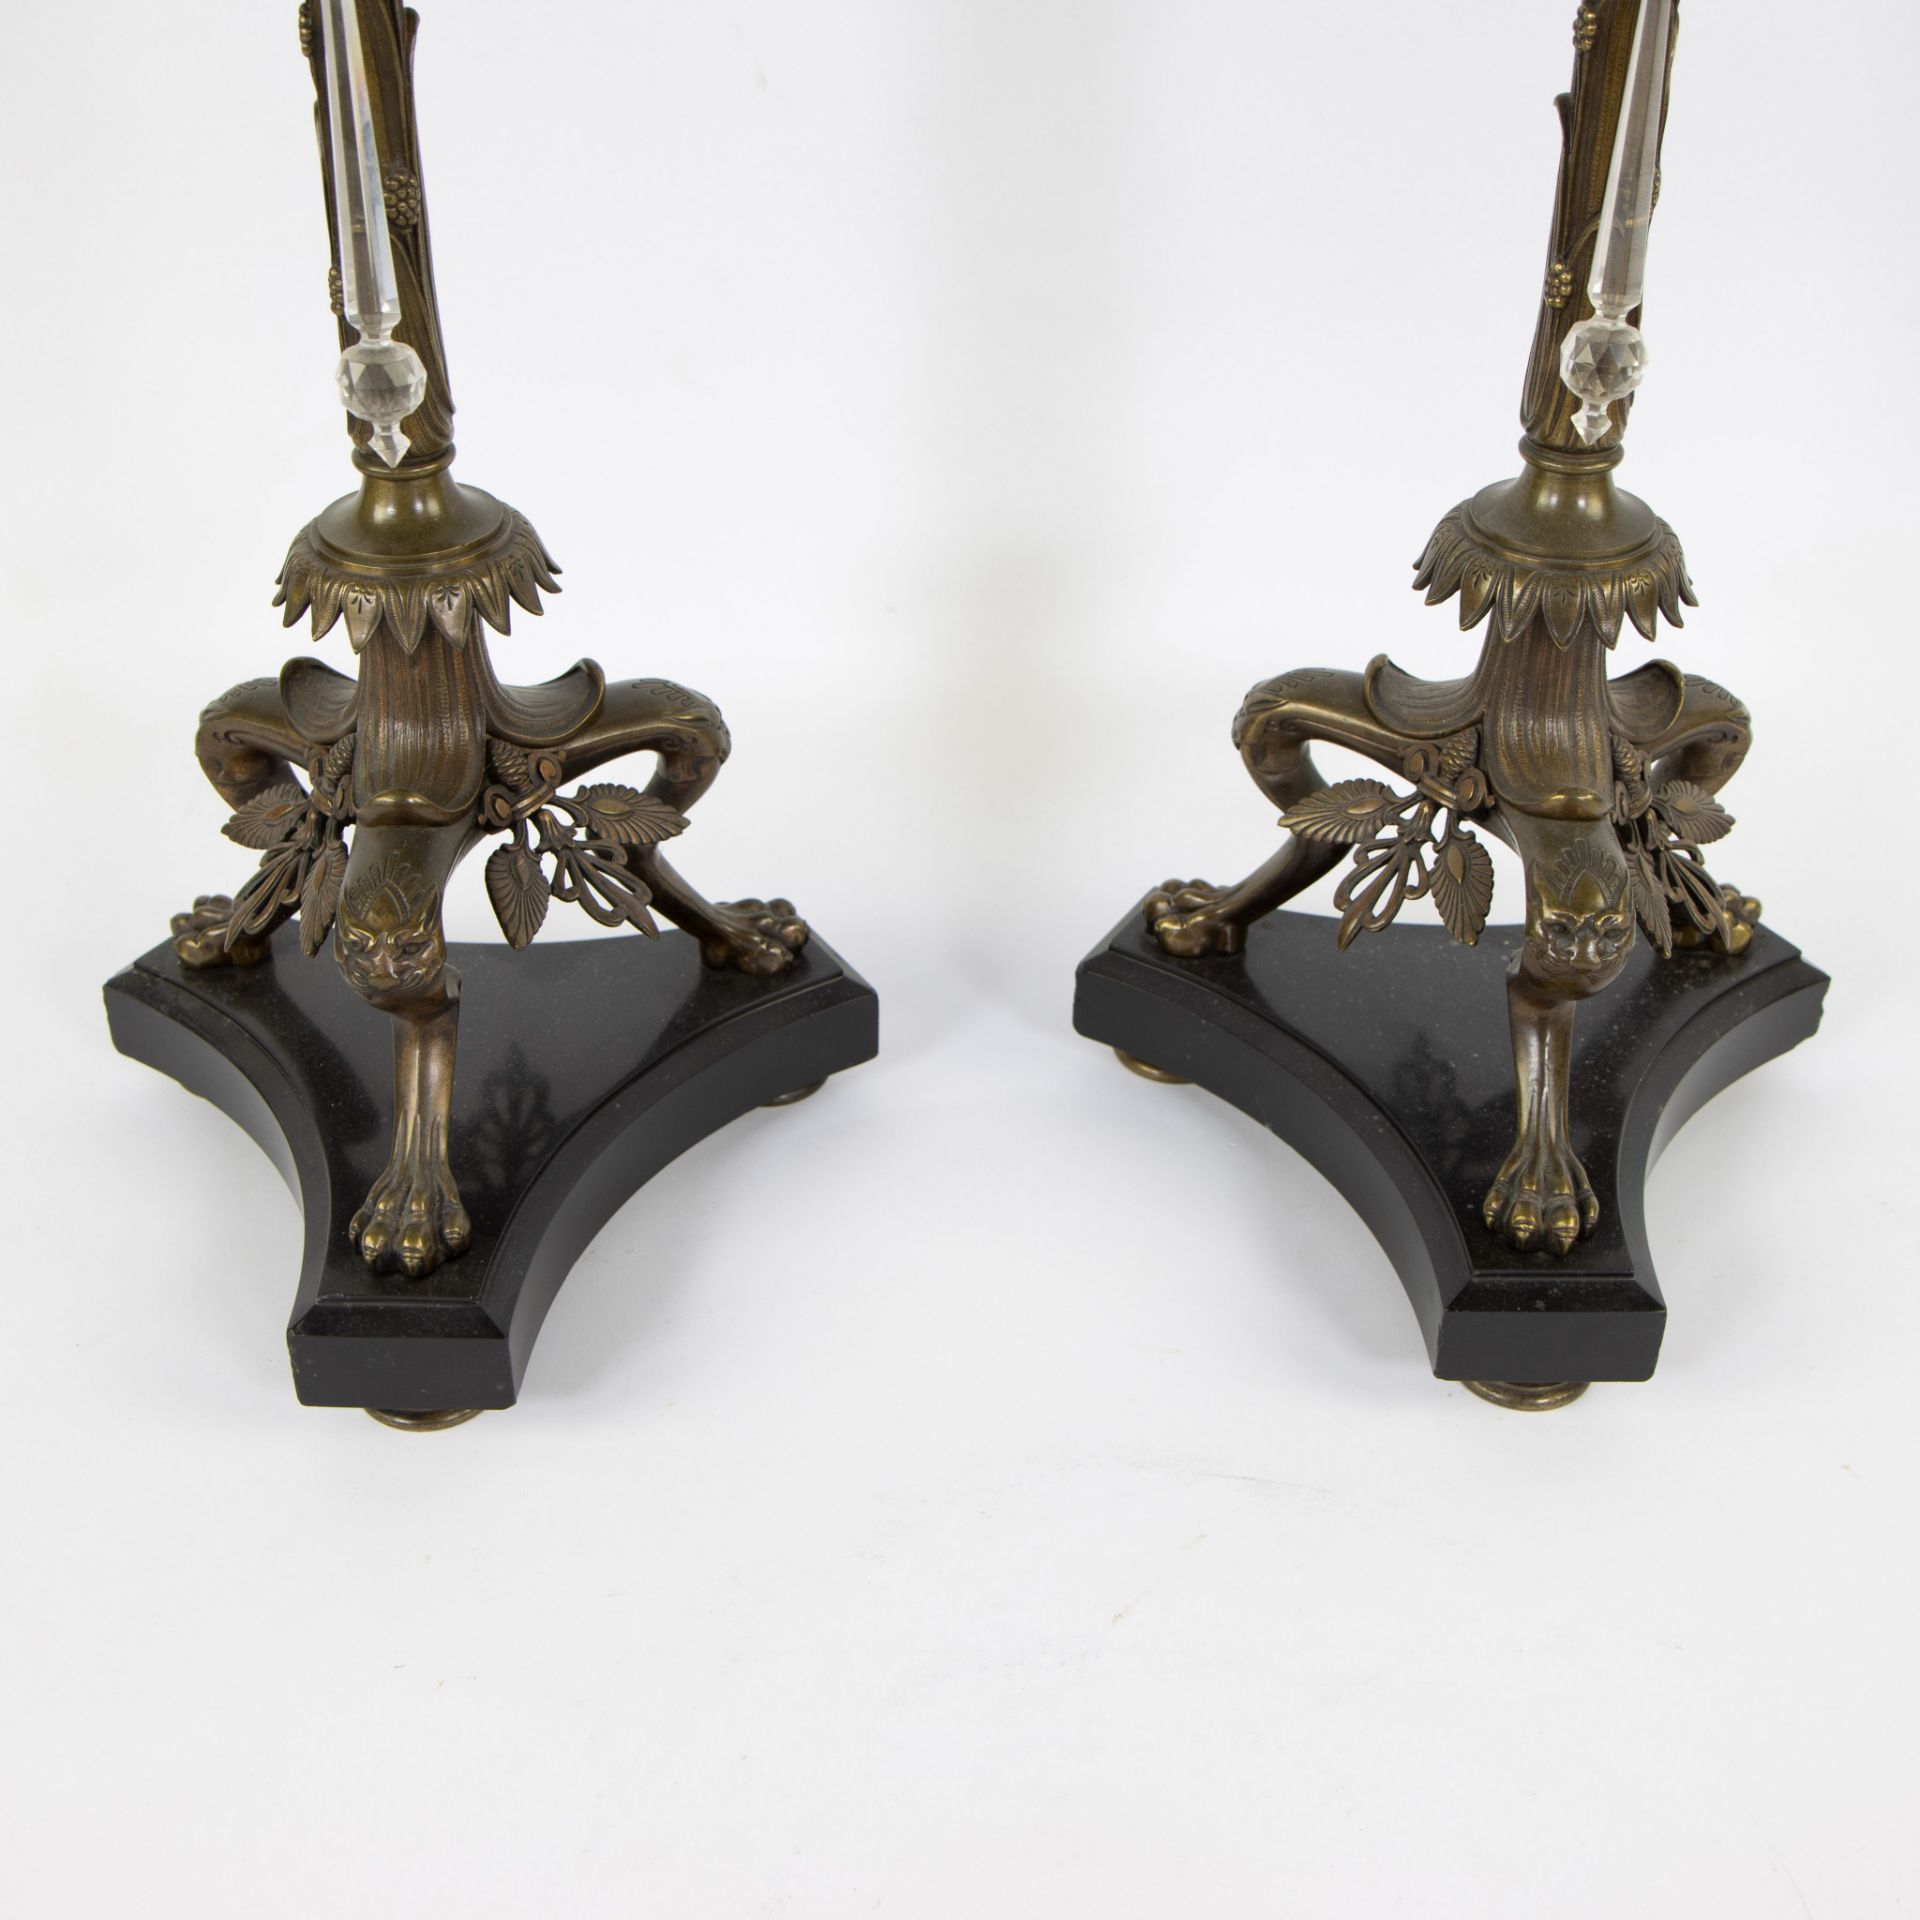 Two large rare solid bronze 19th century candlesticks with 7 light points, standing on claw feet and - Image 2 of 5